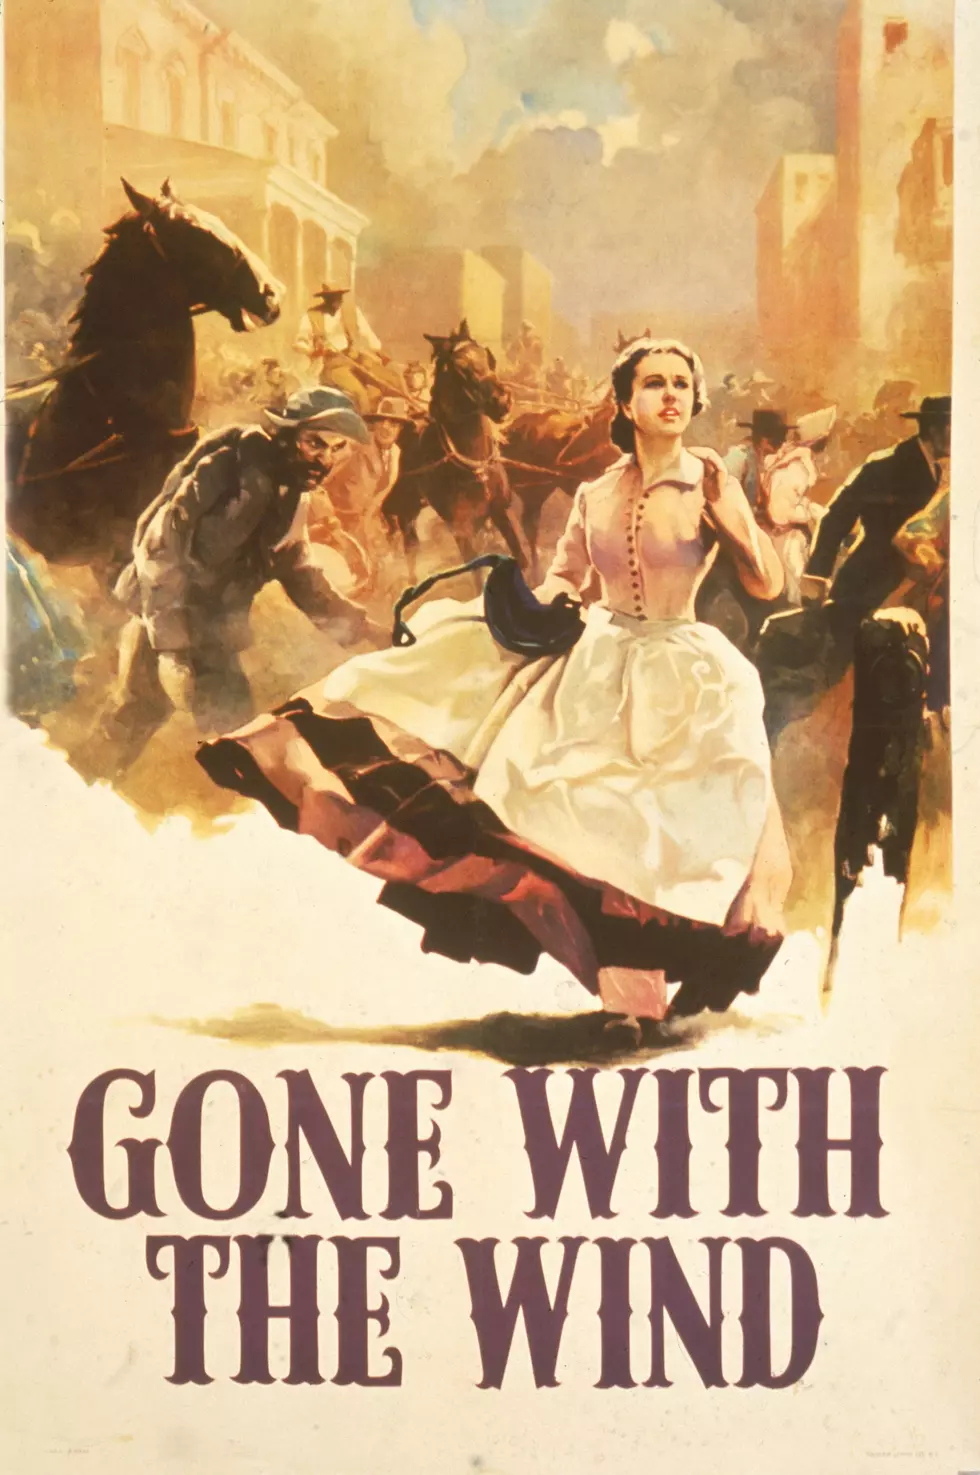 Today In History – “Gone With The Wind” published